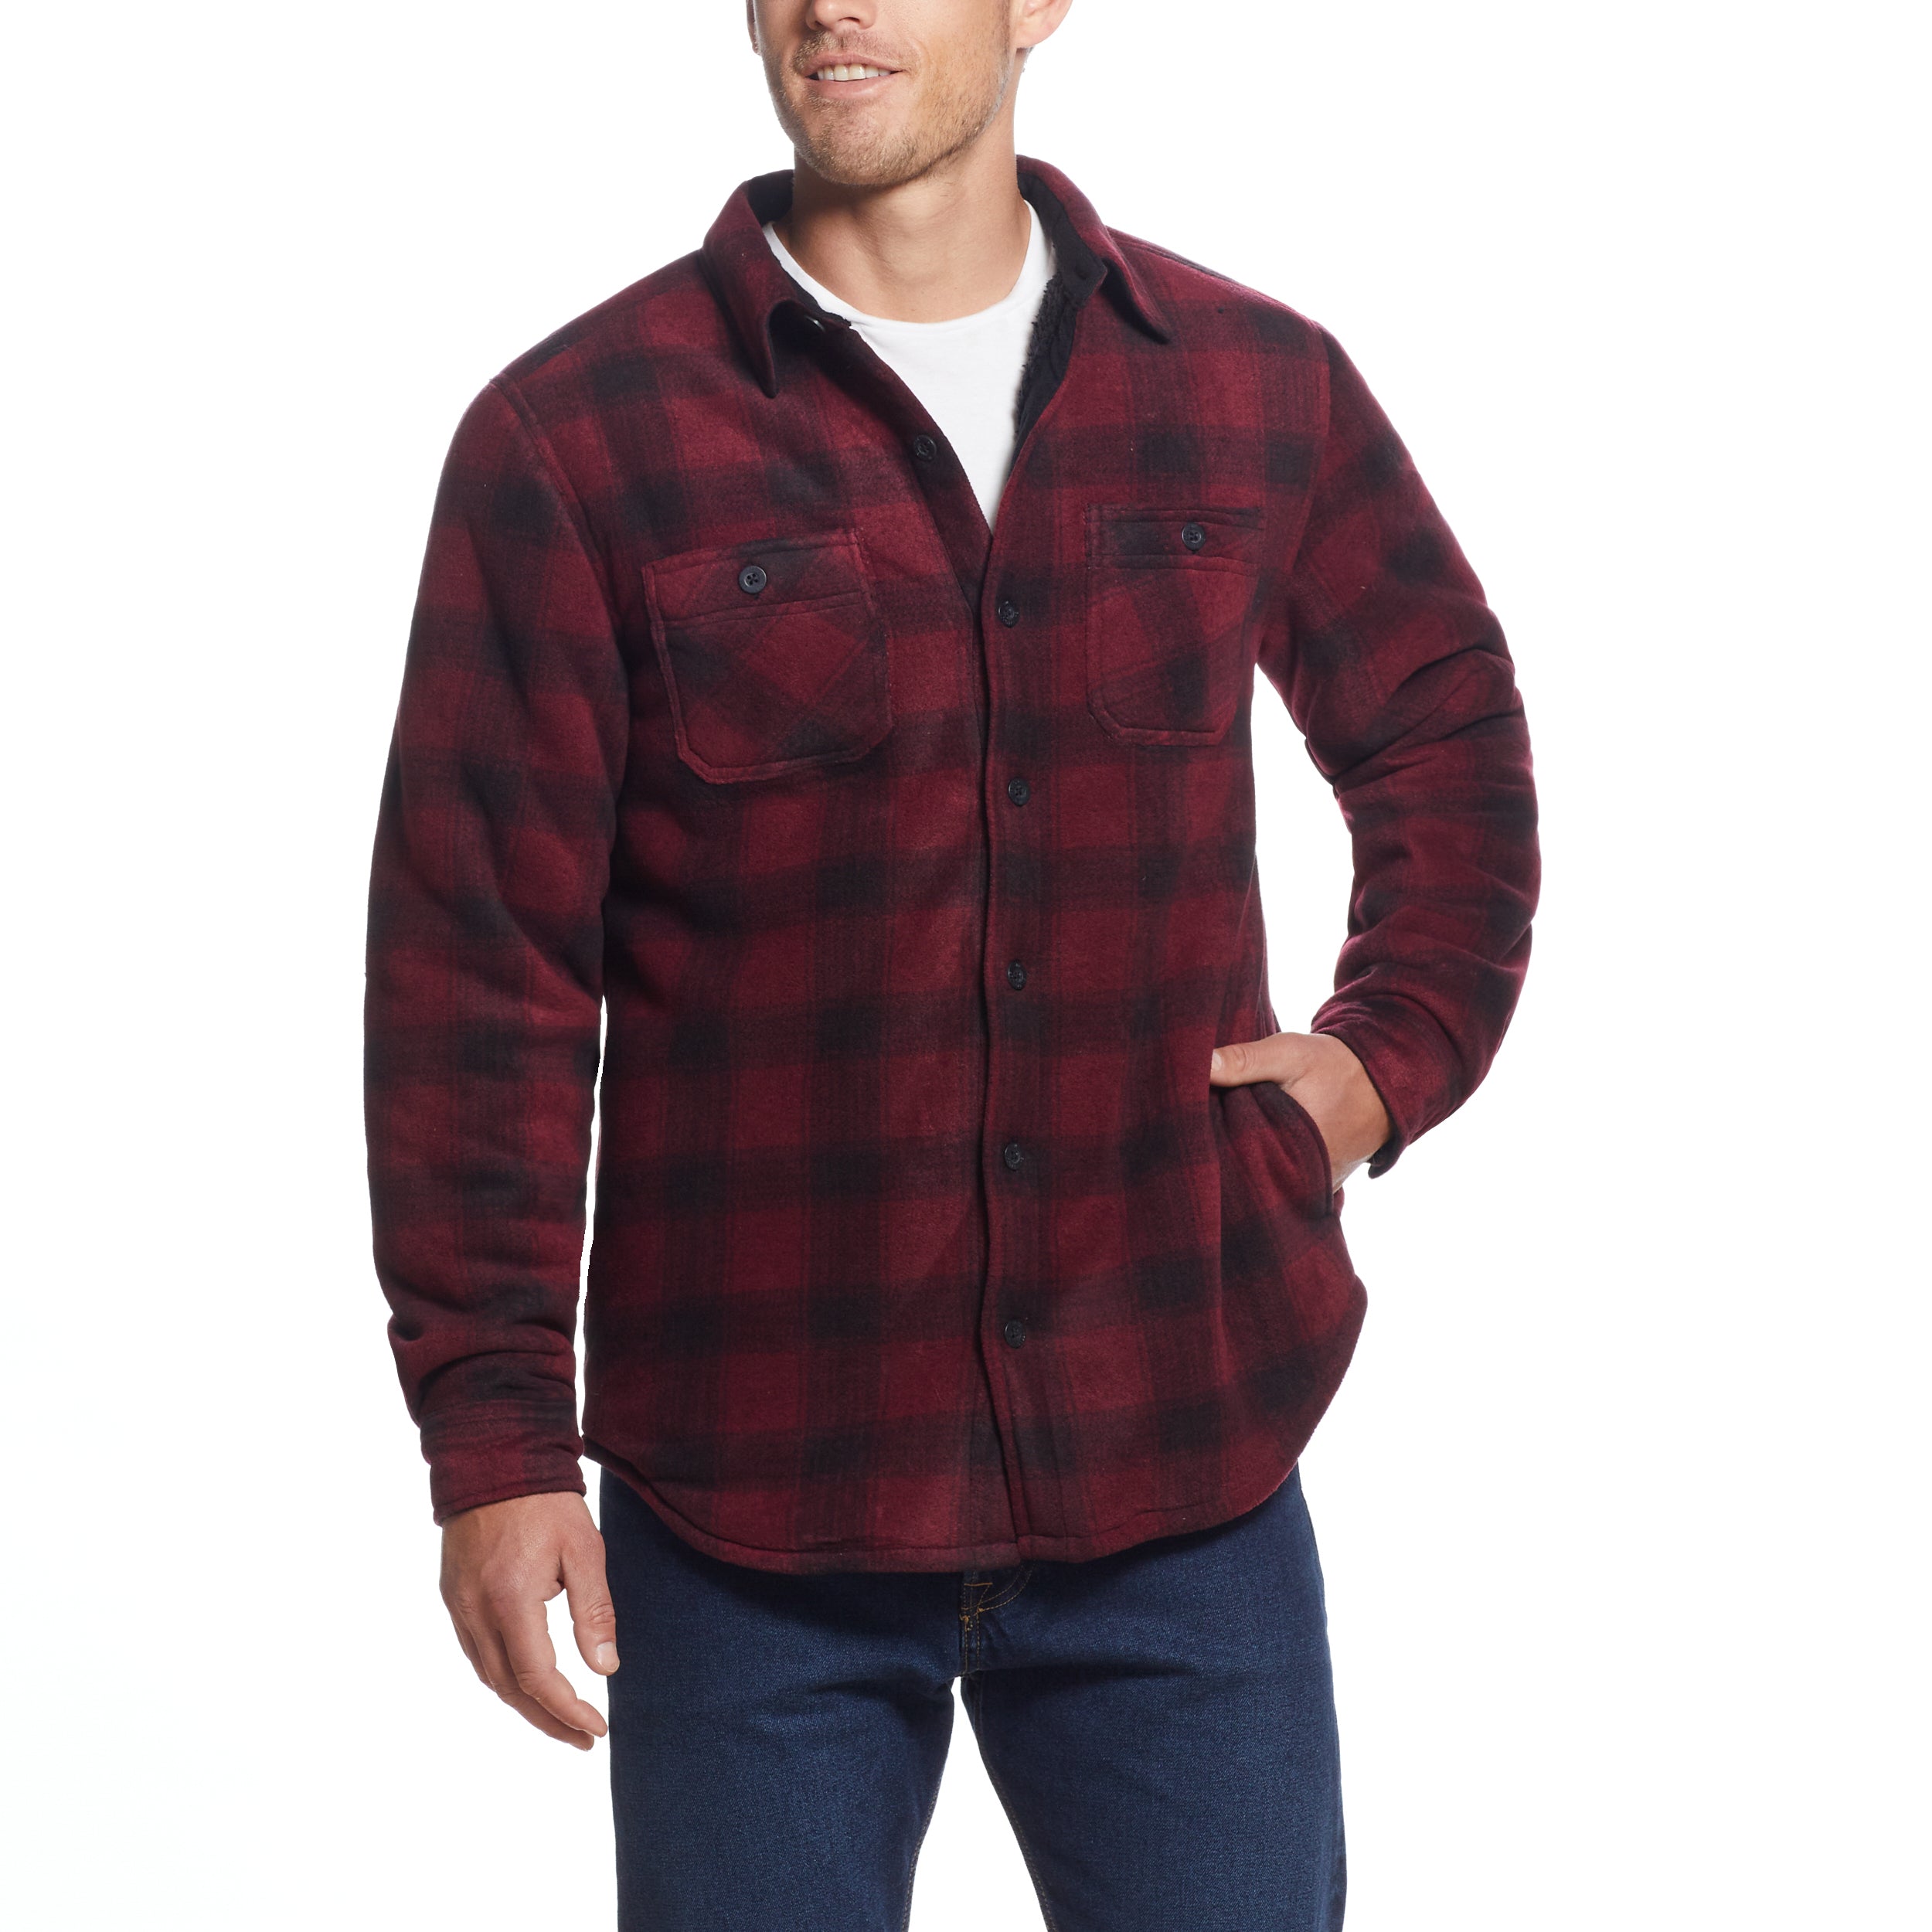 SHERPA LINED SHIRT JACKET in TAWNY PORT RED